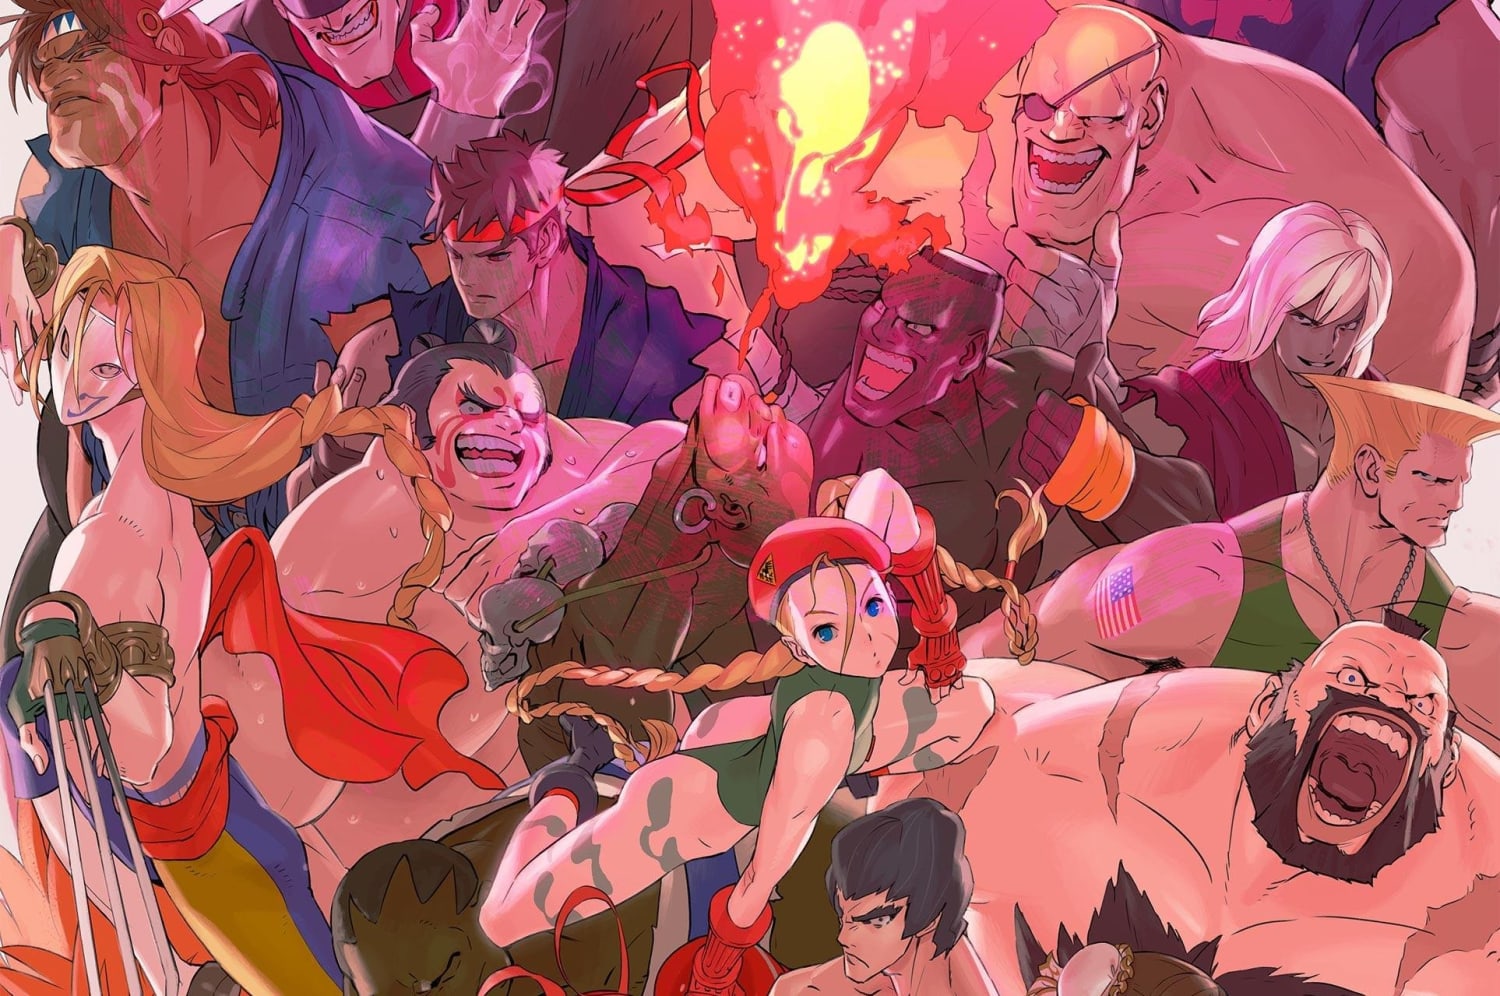 How Street Fighter changed gaming forever: The 10 ways